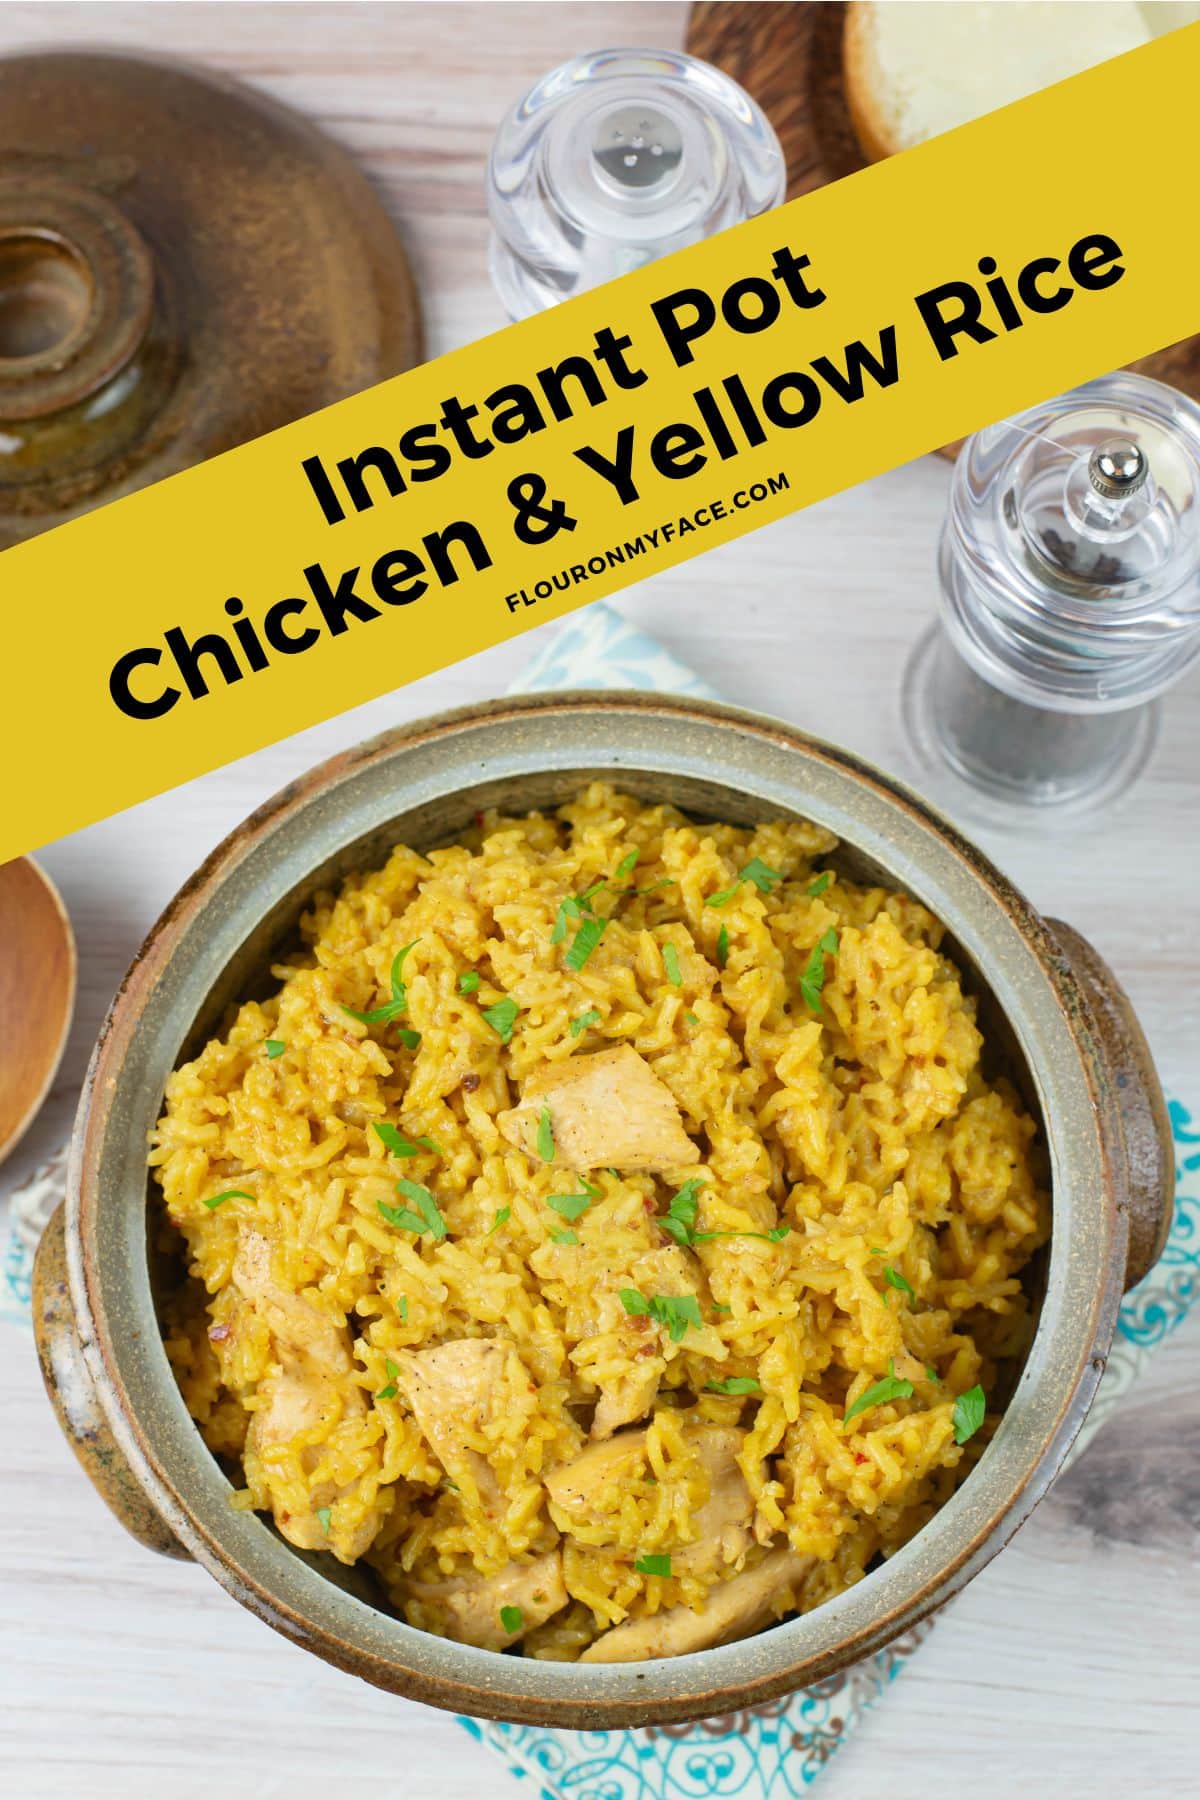 Long vertical image of Instant Pot Chicken and yellow rice in a brown stoneware serving bowl.